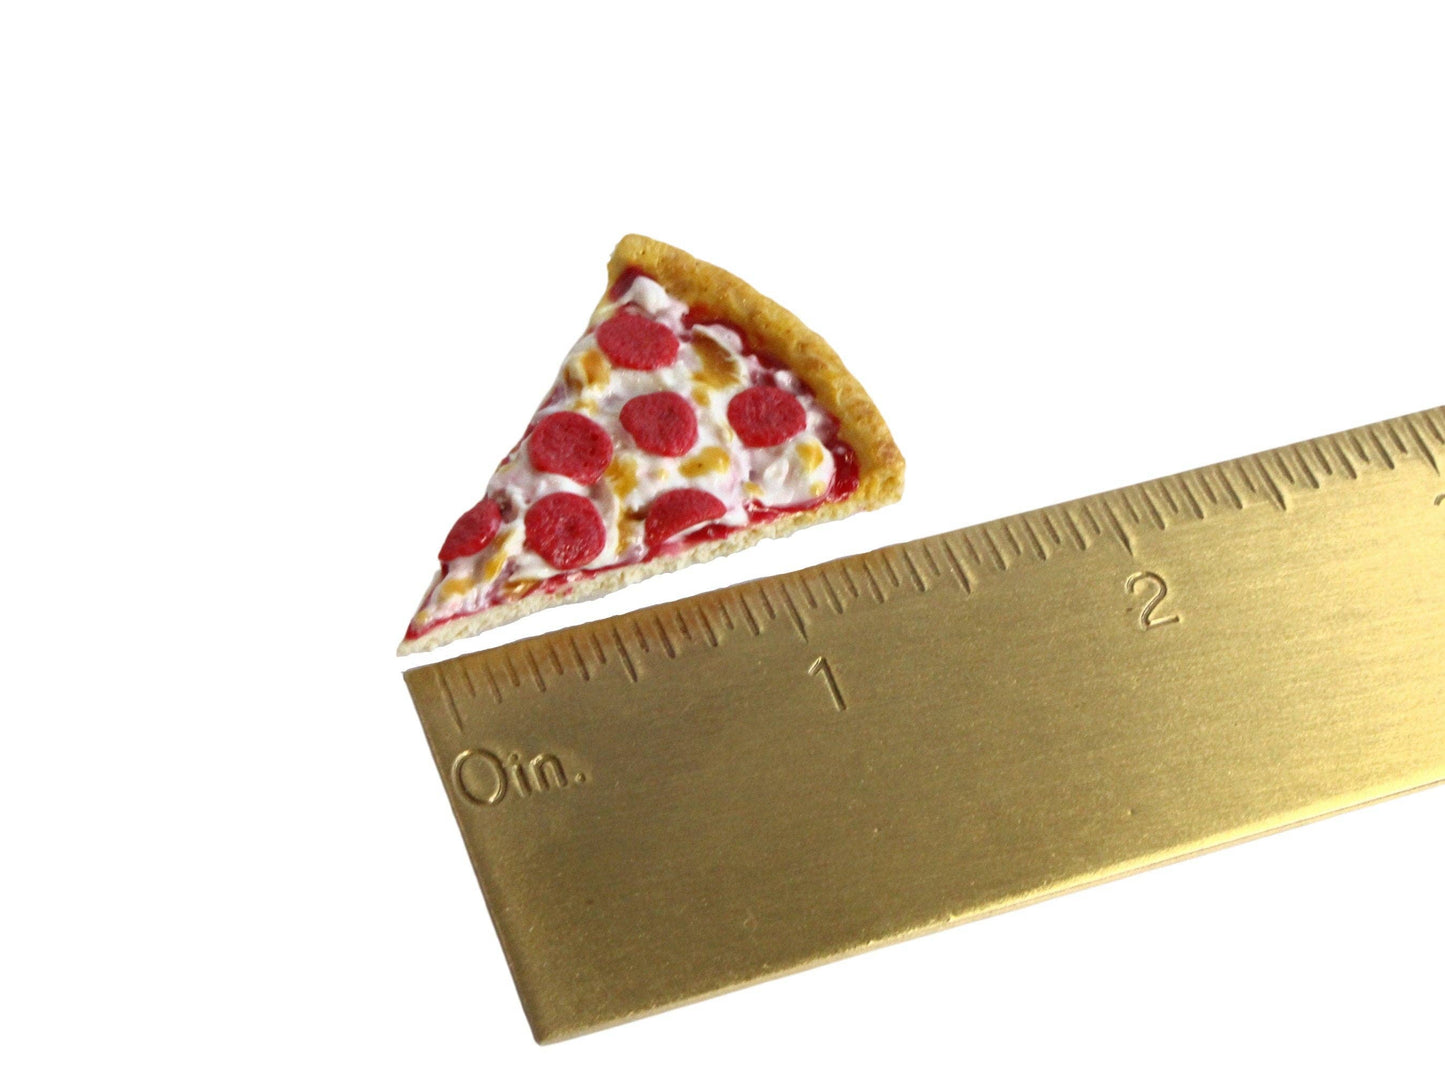 Handmade magnet shaped like a single slice of pepperoni pizza. Shown next to a ruler for size comparison.